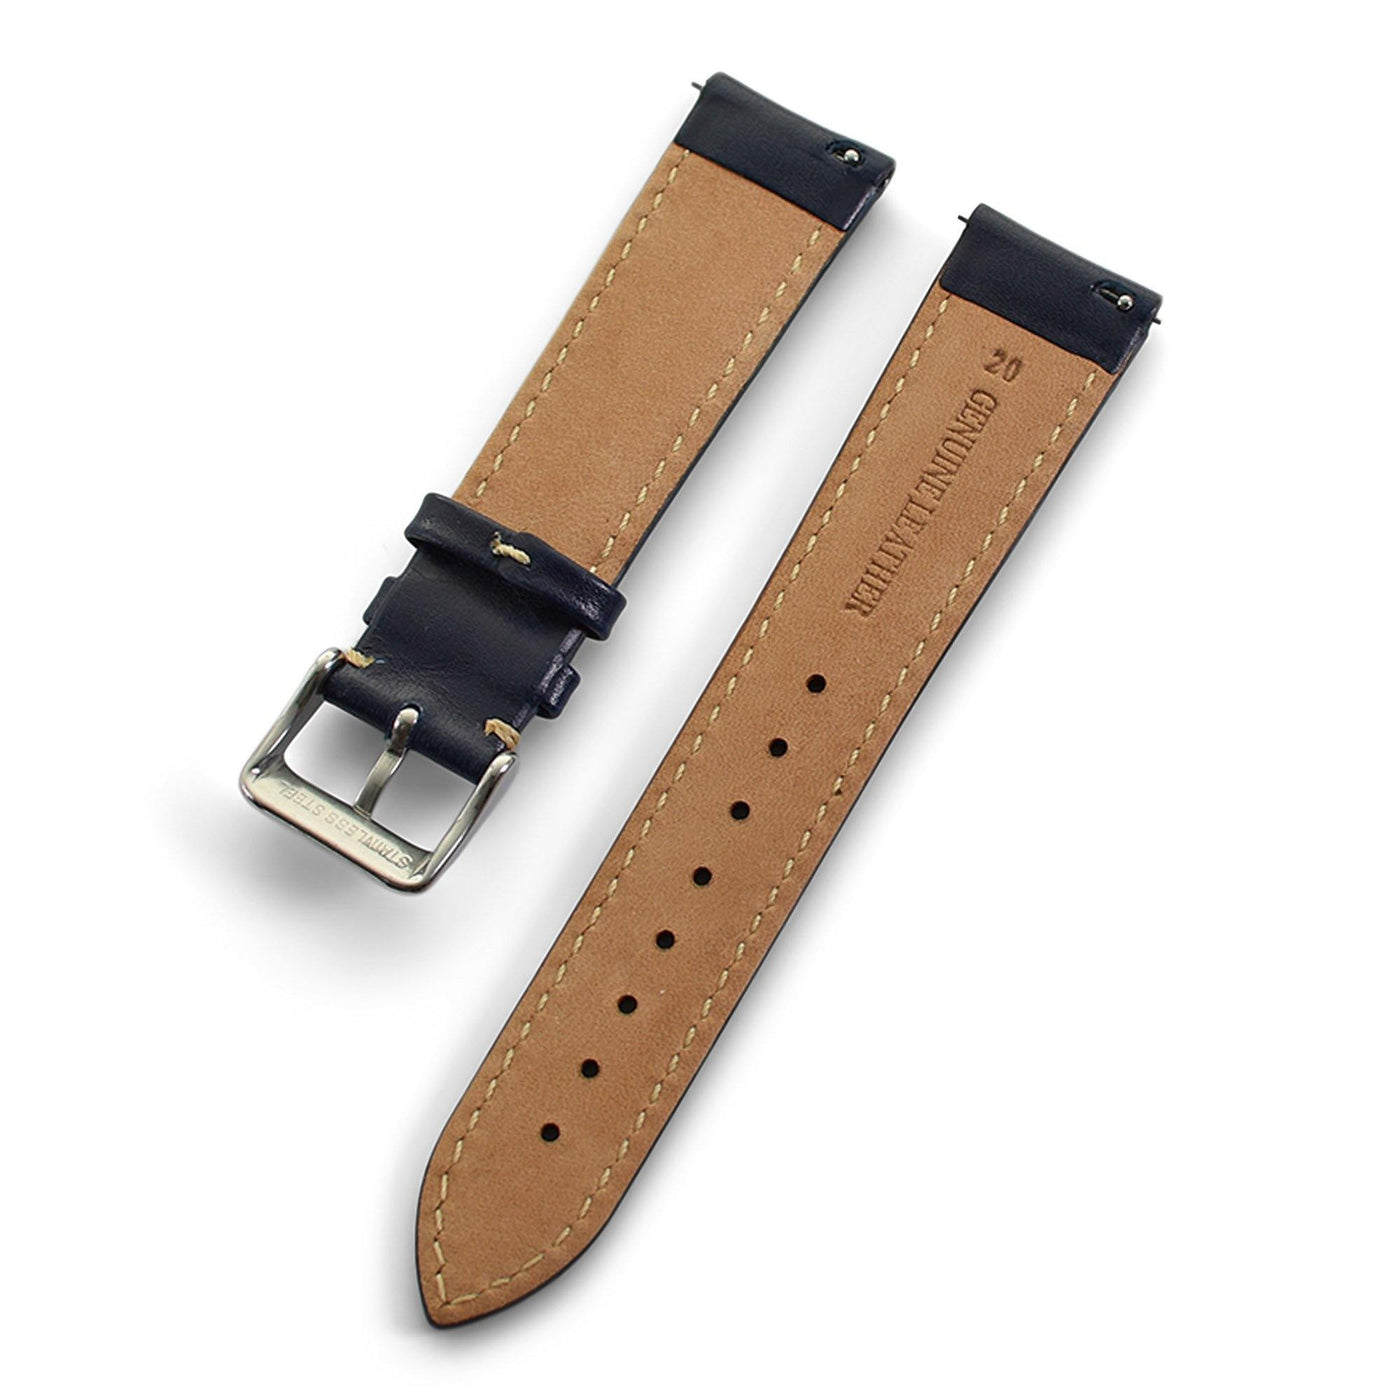 THE CHELSEA QUICK RELEASE NAVY - The Sydney Strap Co.